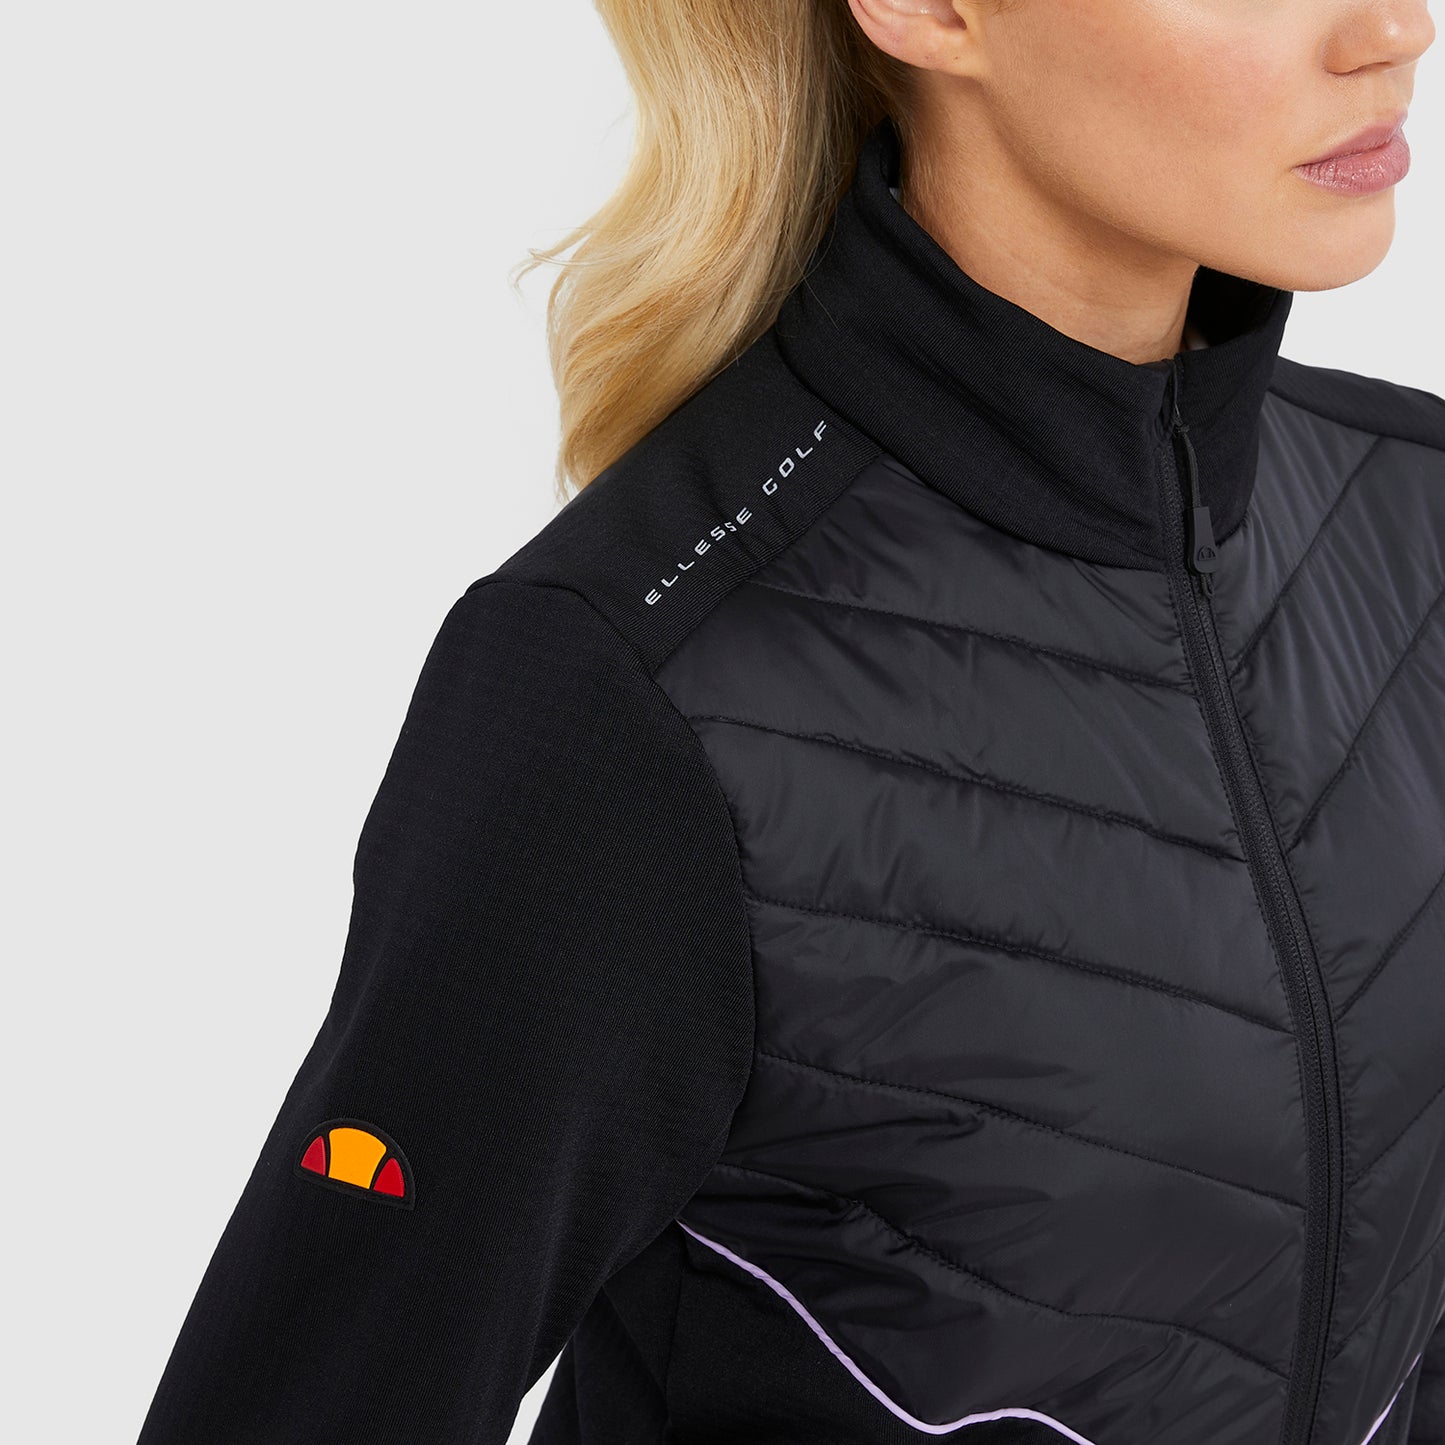 Ellesse Ladies Soft-Stretch Jacket with Quilted Panels in Black - Last One Size 12 Only Left